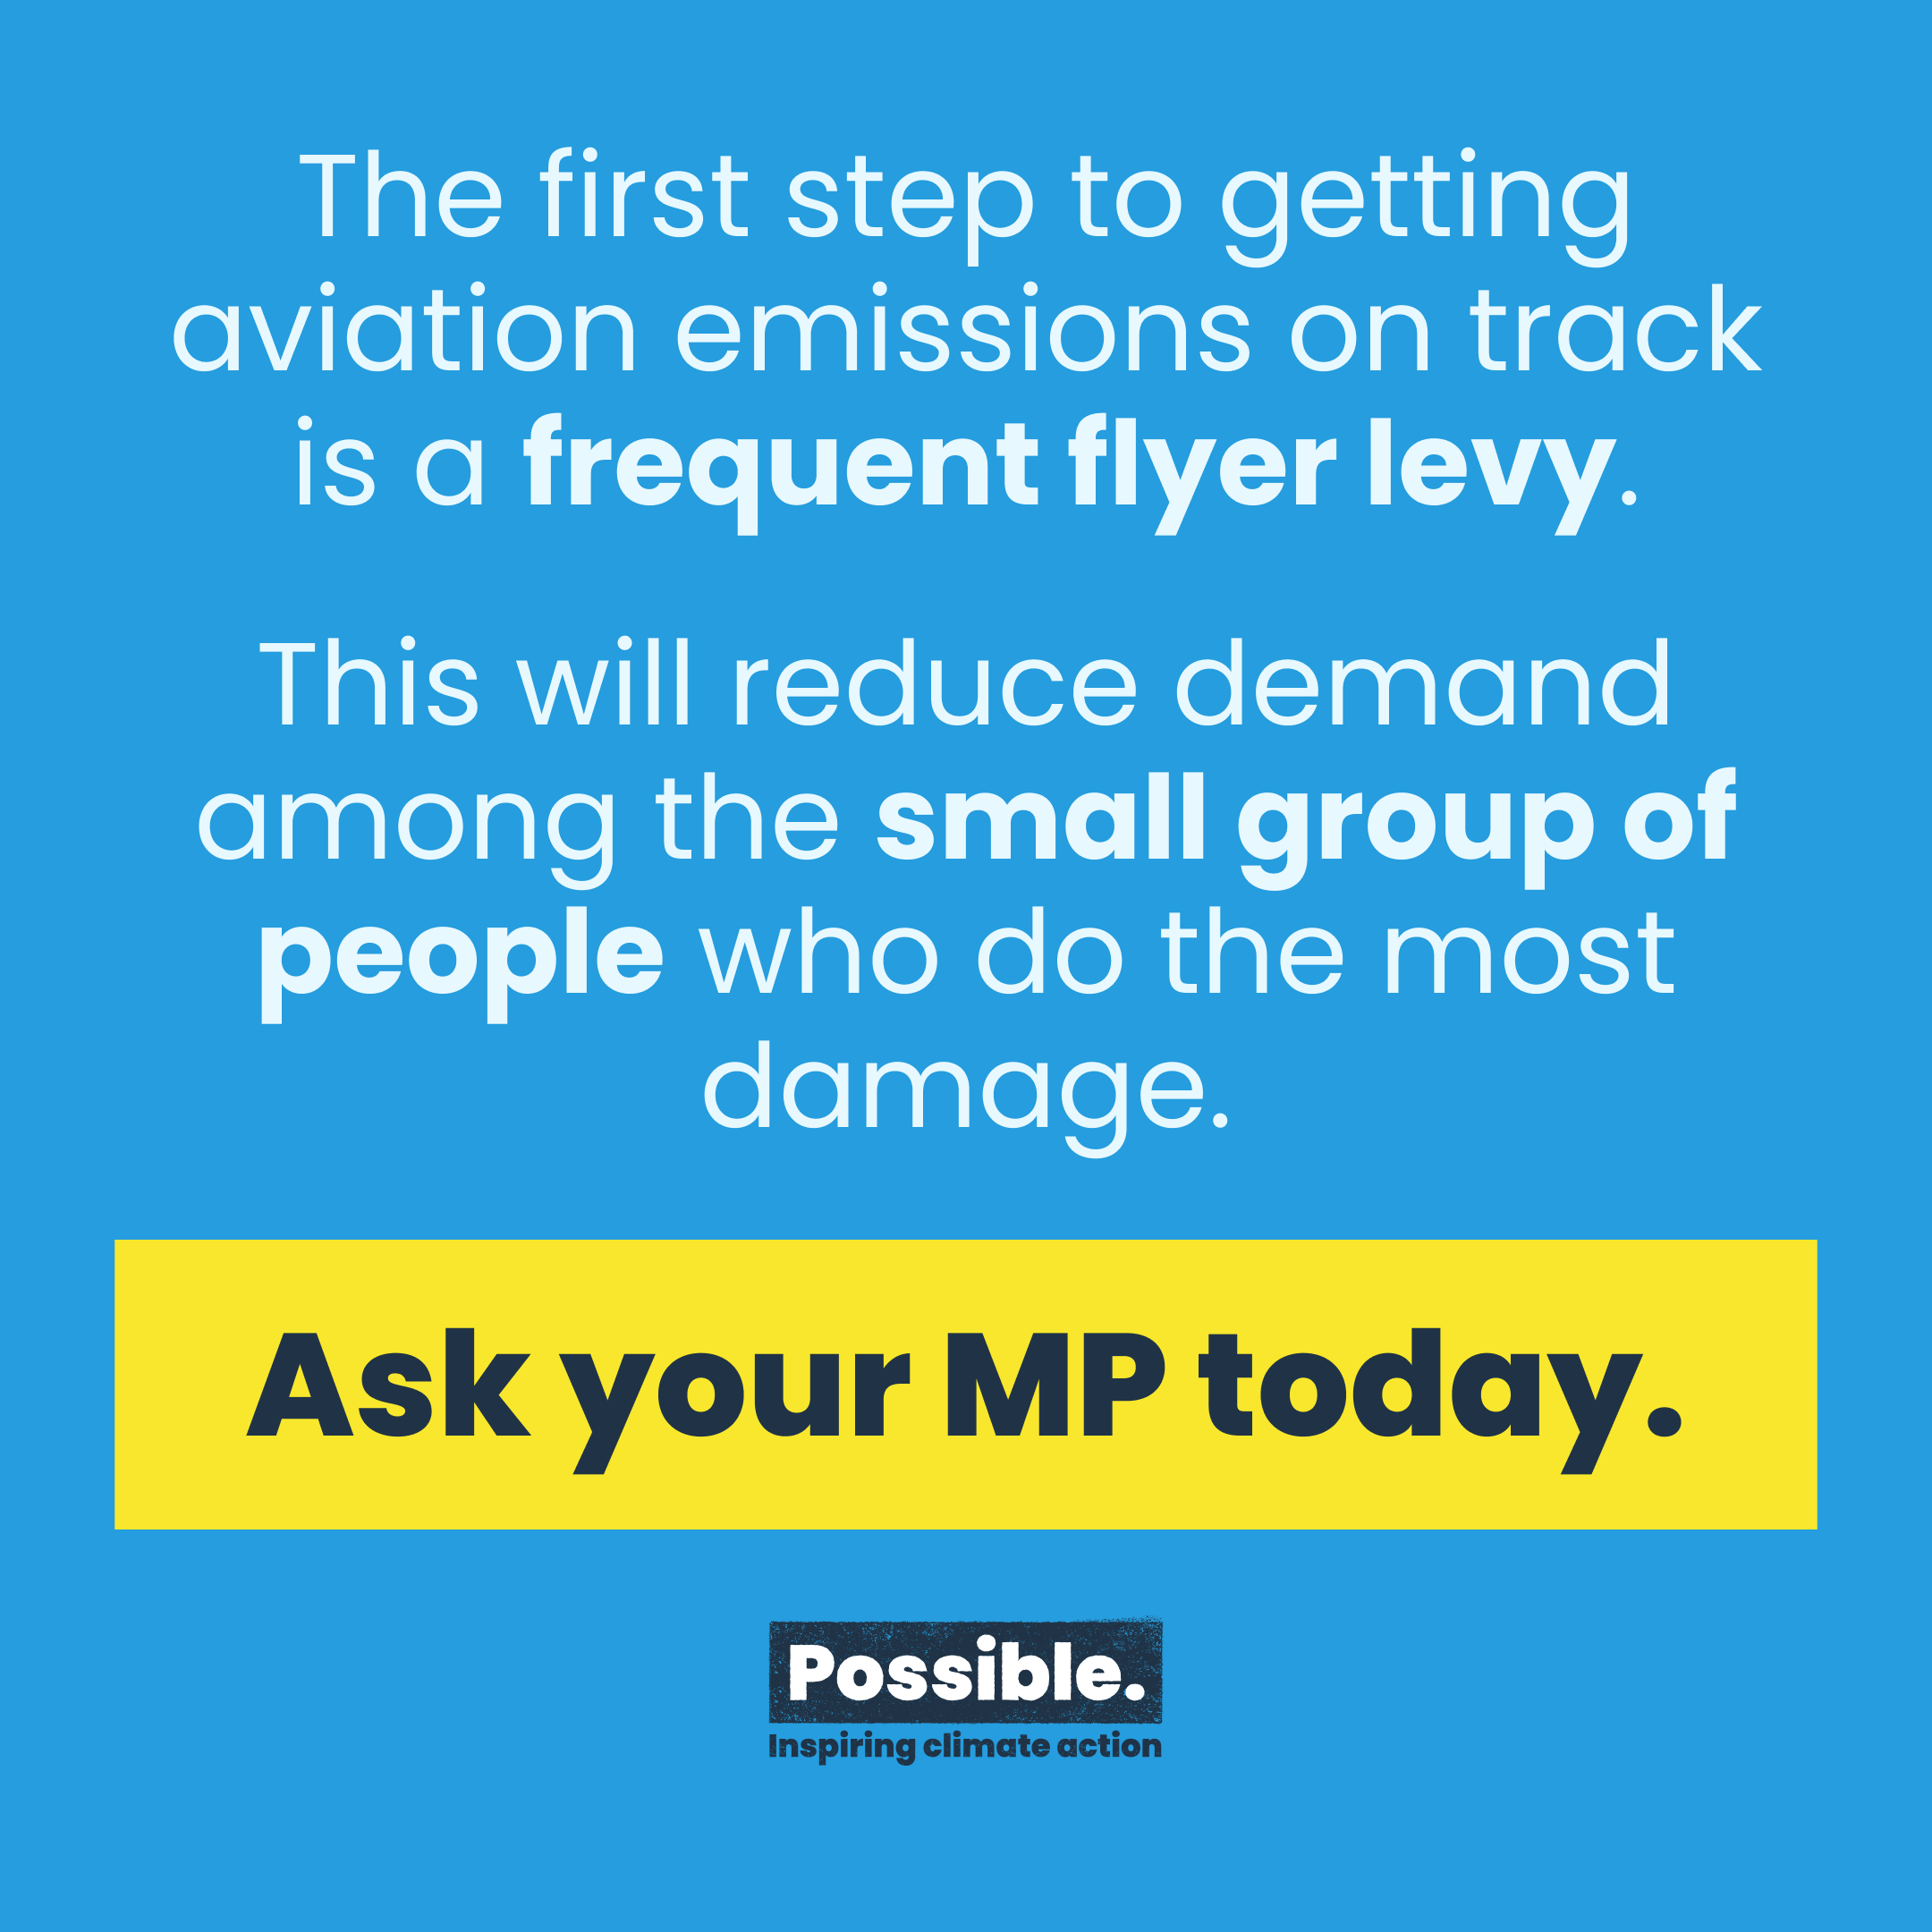 Click image to email your MP